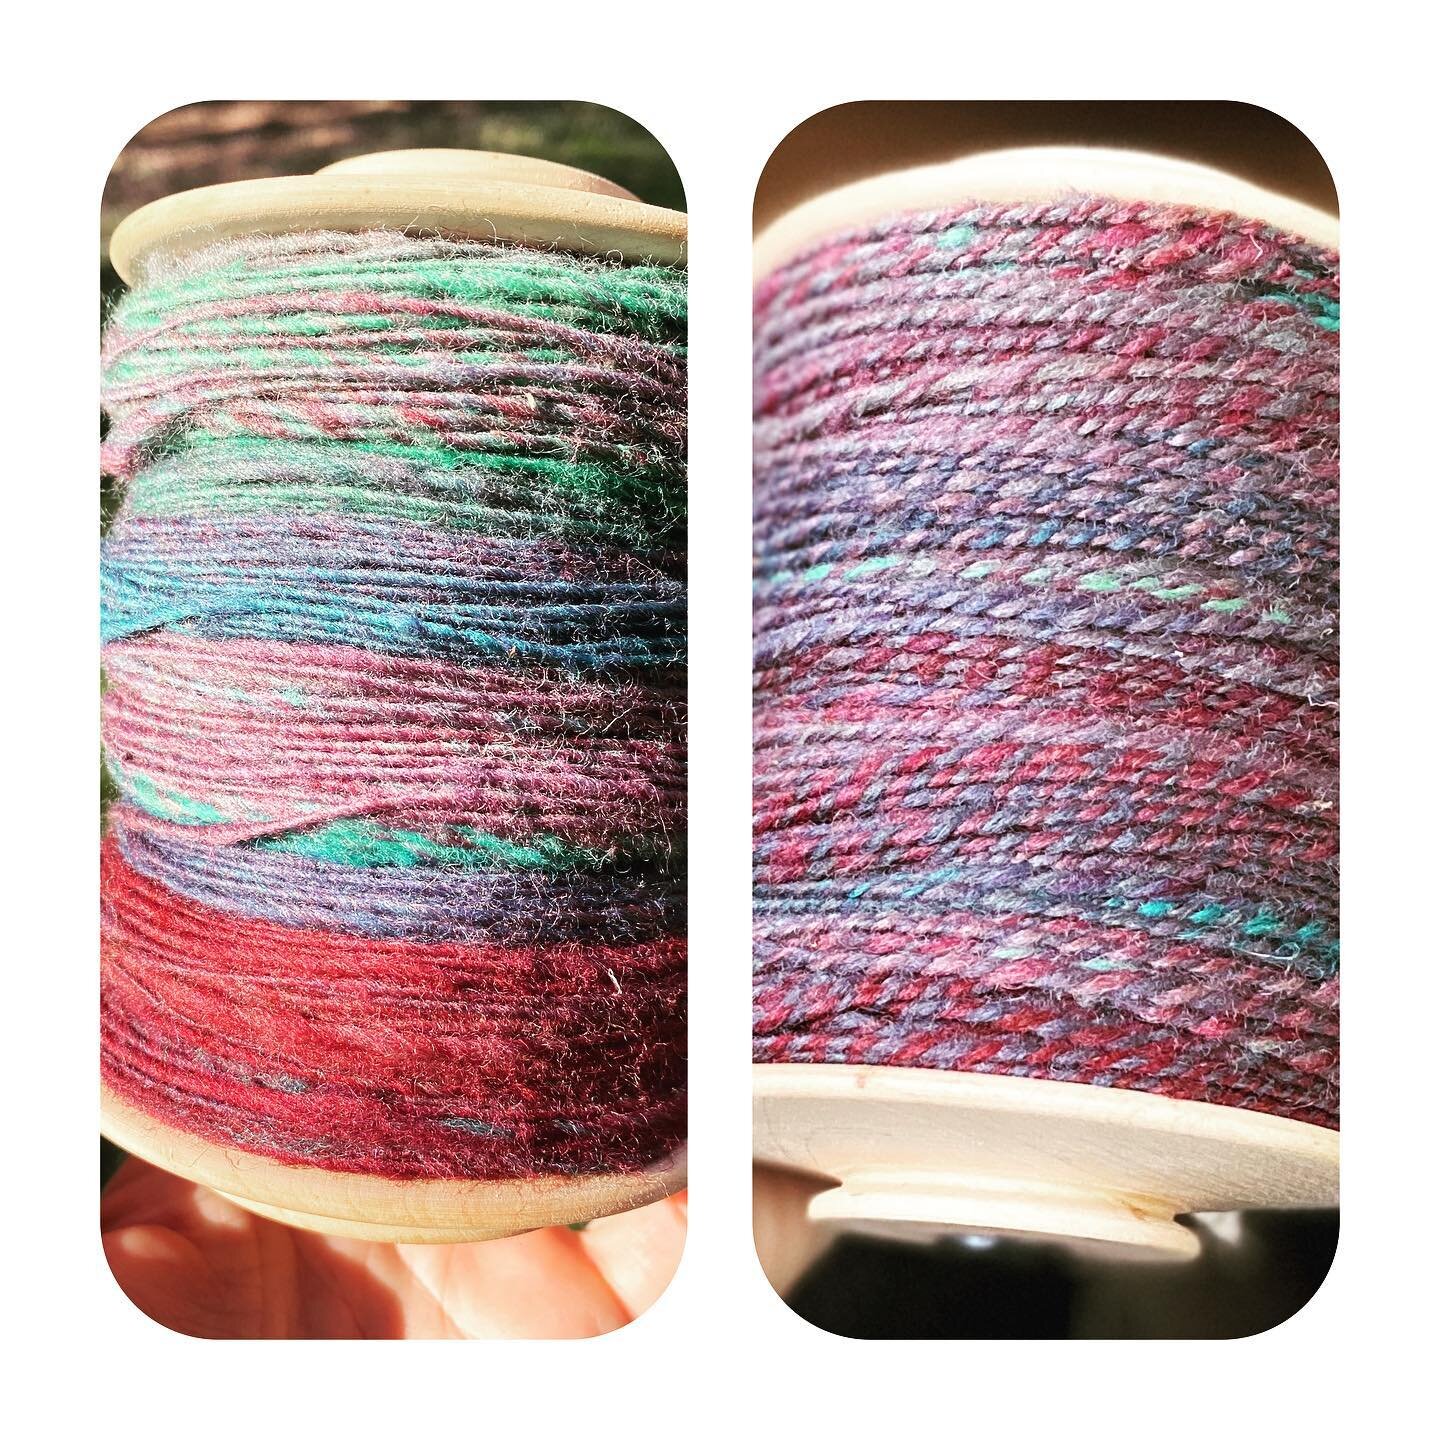 Before - hand-spun singles. After - two ply yarn. I am happy with the the subtle berry tones of this spin. Next up - a pottery post! 

#colortheory #blendingcolors #wool #cheviot #handspinnersofinstagram #yarn #handmade #kromski #makingarteveryday